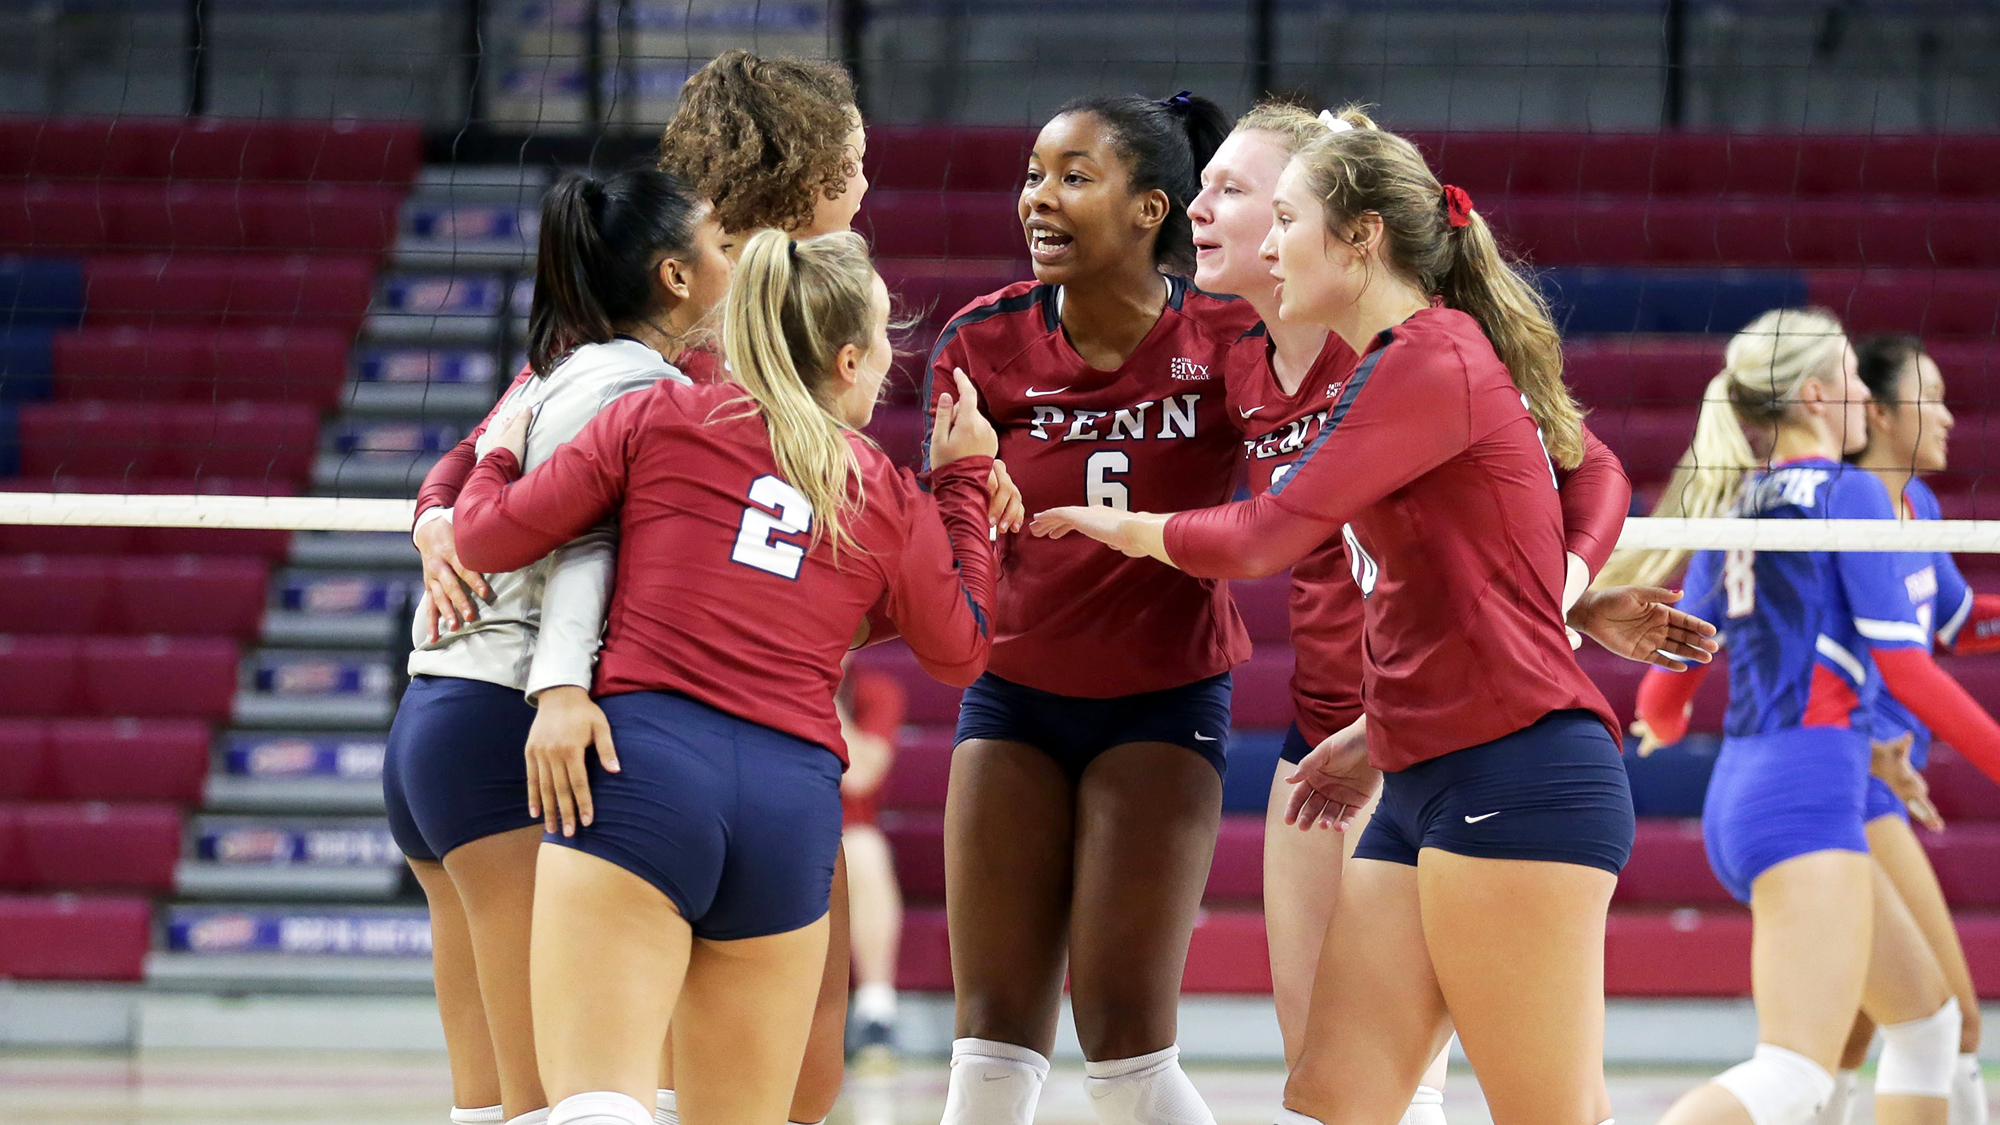 Members of the women's volleyball team converse on the court in a circle.